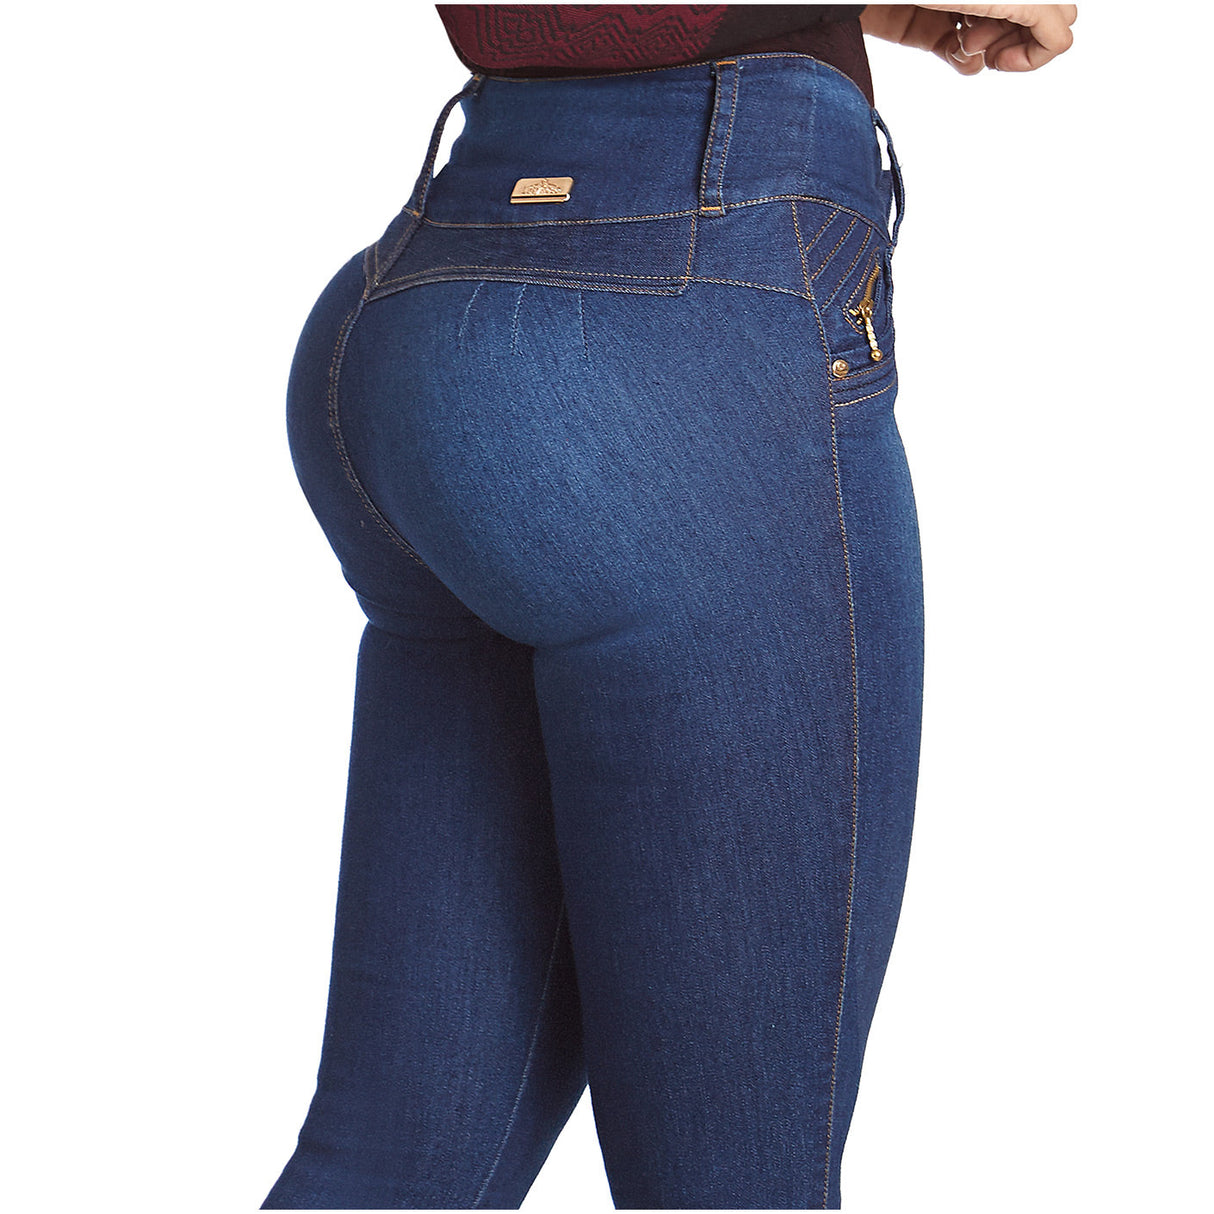 Colombian Butt lifting Jean Style Jeans Размер: Usa 9/ Colombia 14